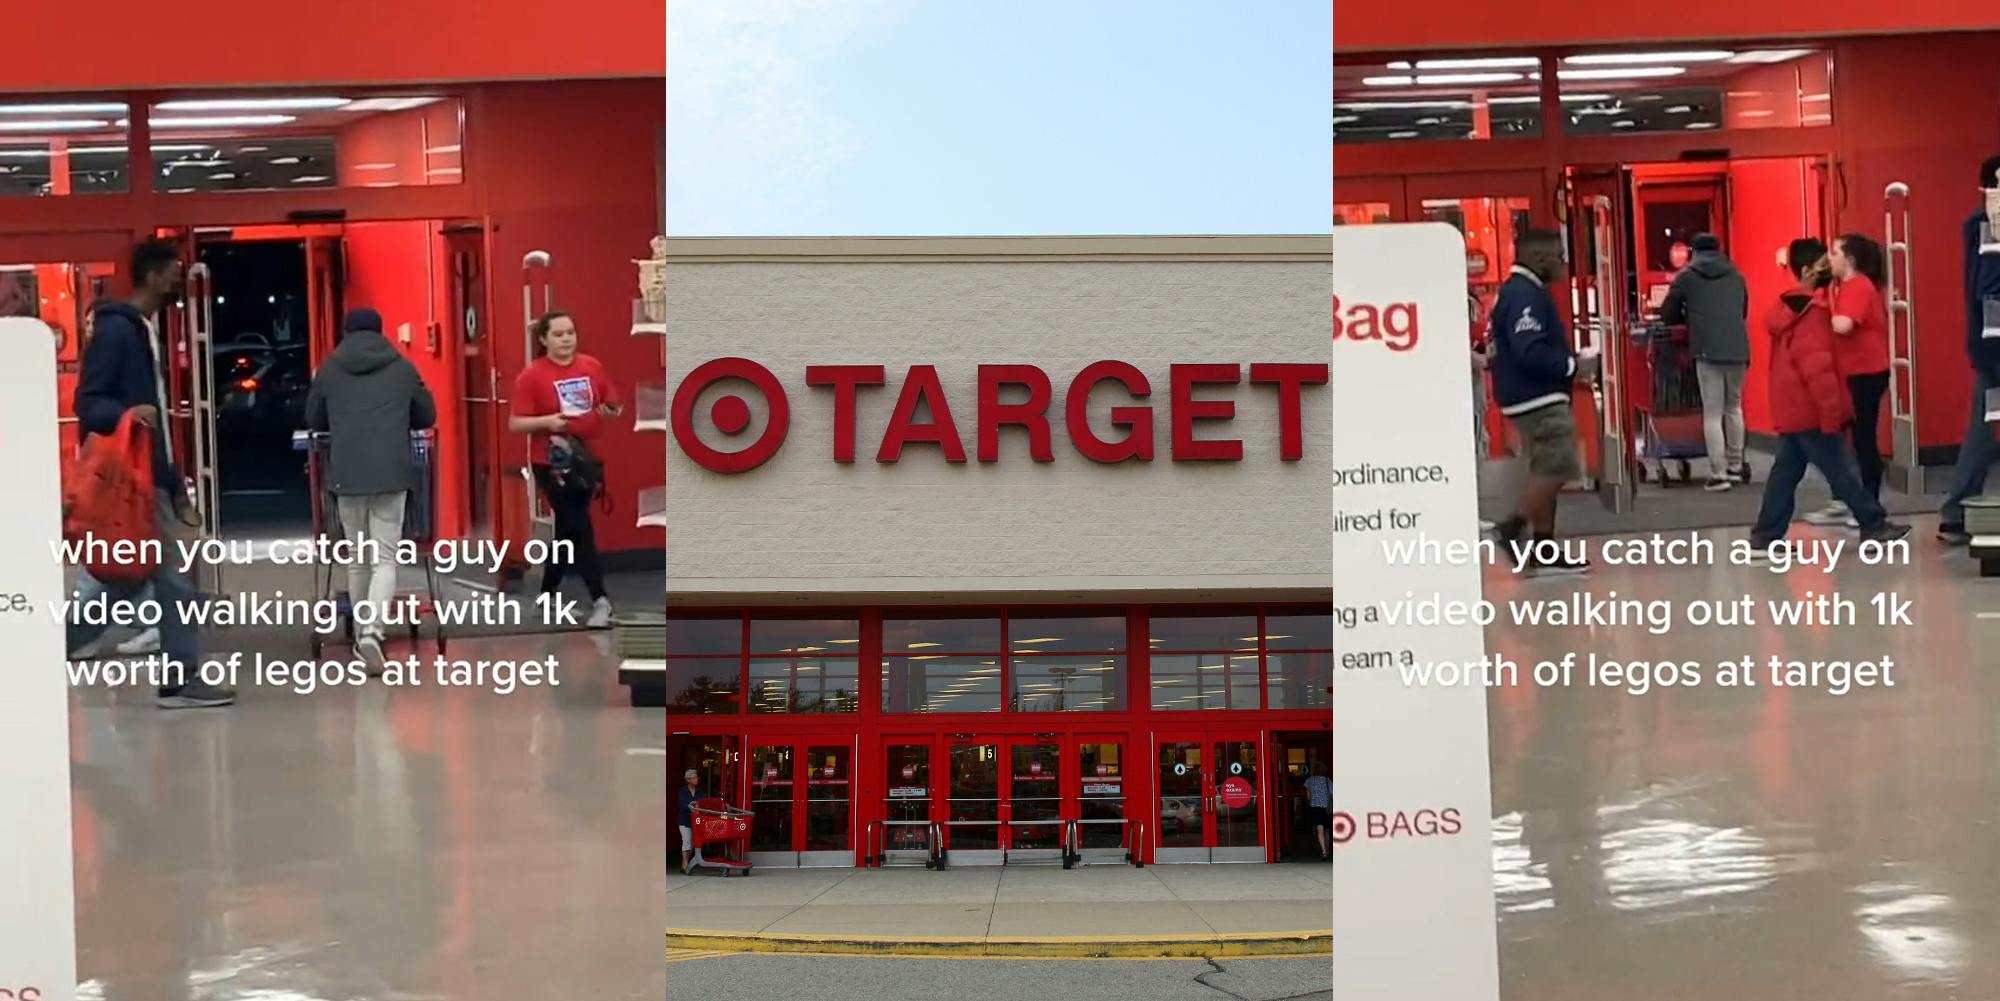 man with shopping cart walking out of Target with caption 'when you catch a guy on video walking out with 1k worth of legos at target' (l) Target sign on building with blue sky (c) man with shopping cart walking out of Target with caption 'when you catch a guy on video walking out with 1k worth of legos at target' (r)